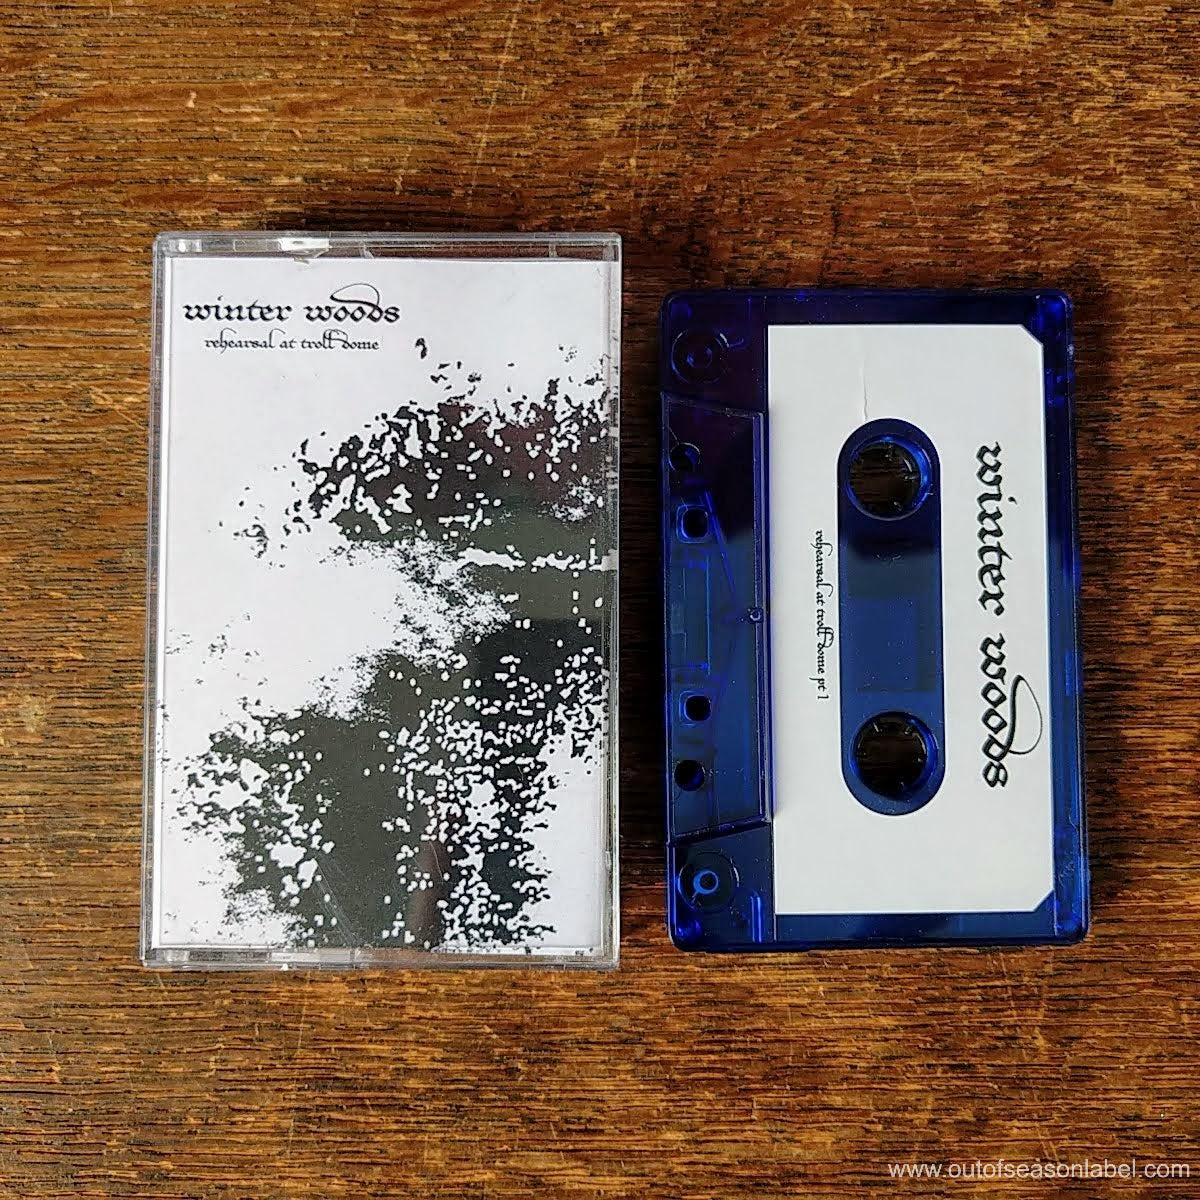 [SOLD OUT] WINTER WOODS "Rehearsal at Troll Dome" Cassette Tape